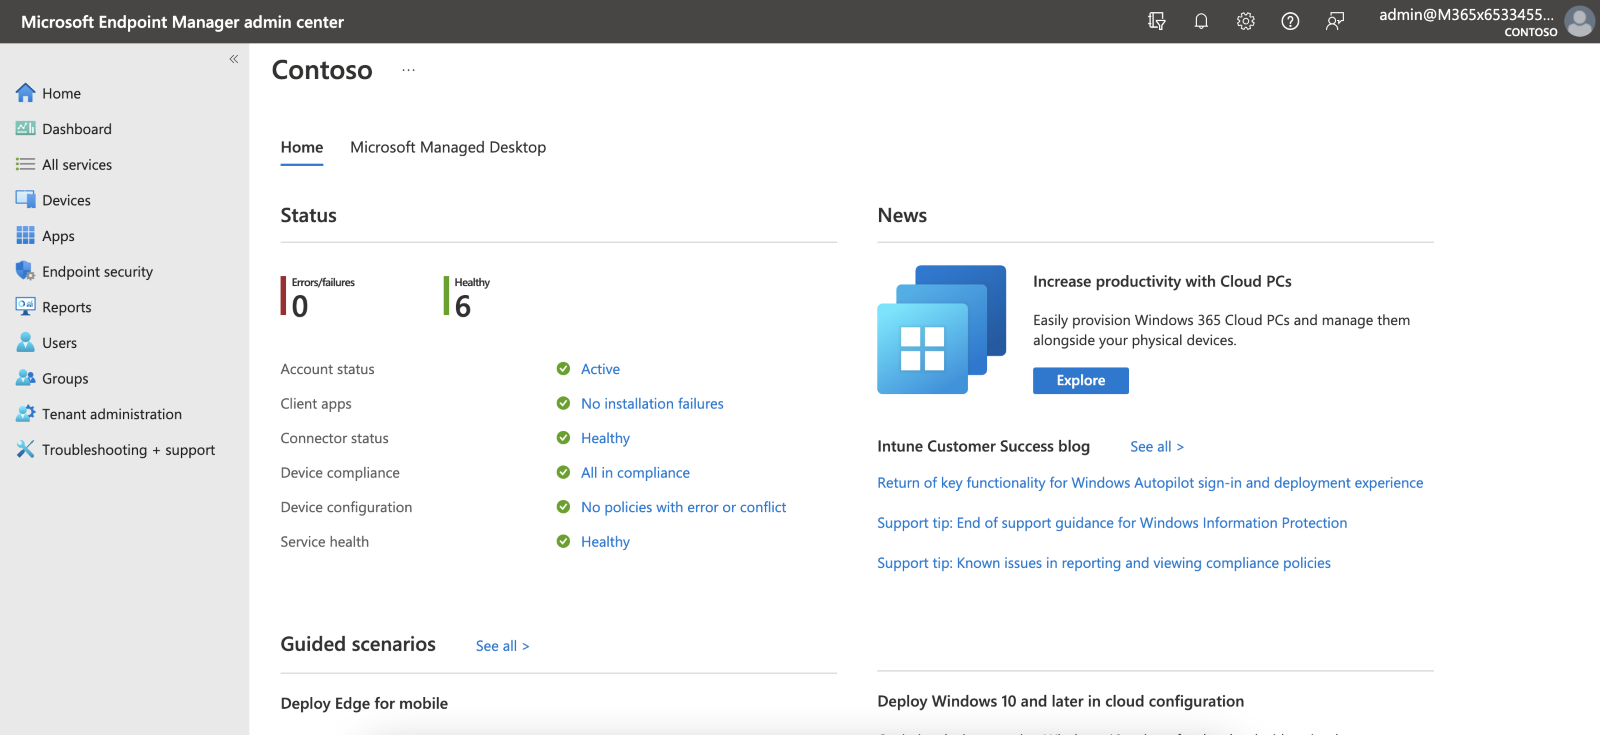 Go to Microsoft Endpoint Manager Admin Center